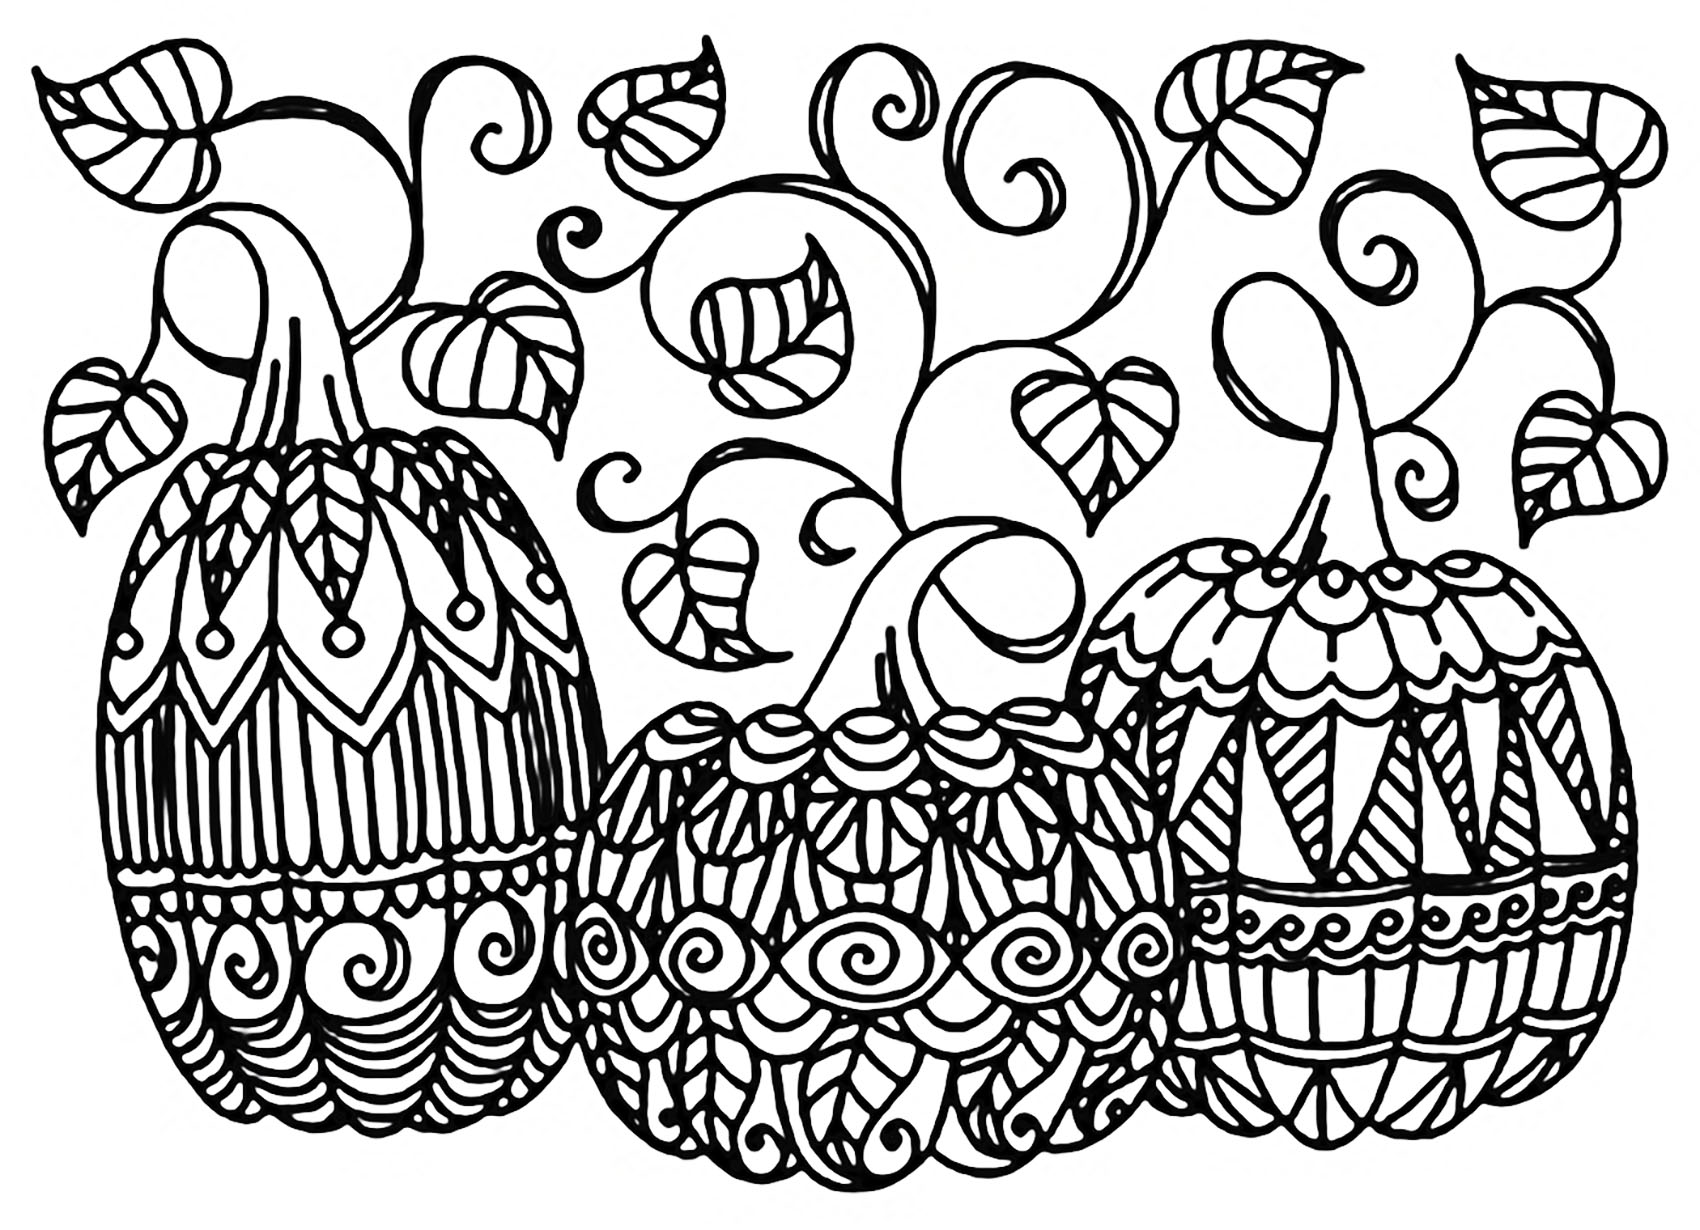 Free Halloween coloring pages to download - Halloween Kids Coloring Pages